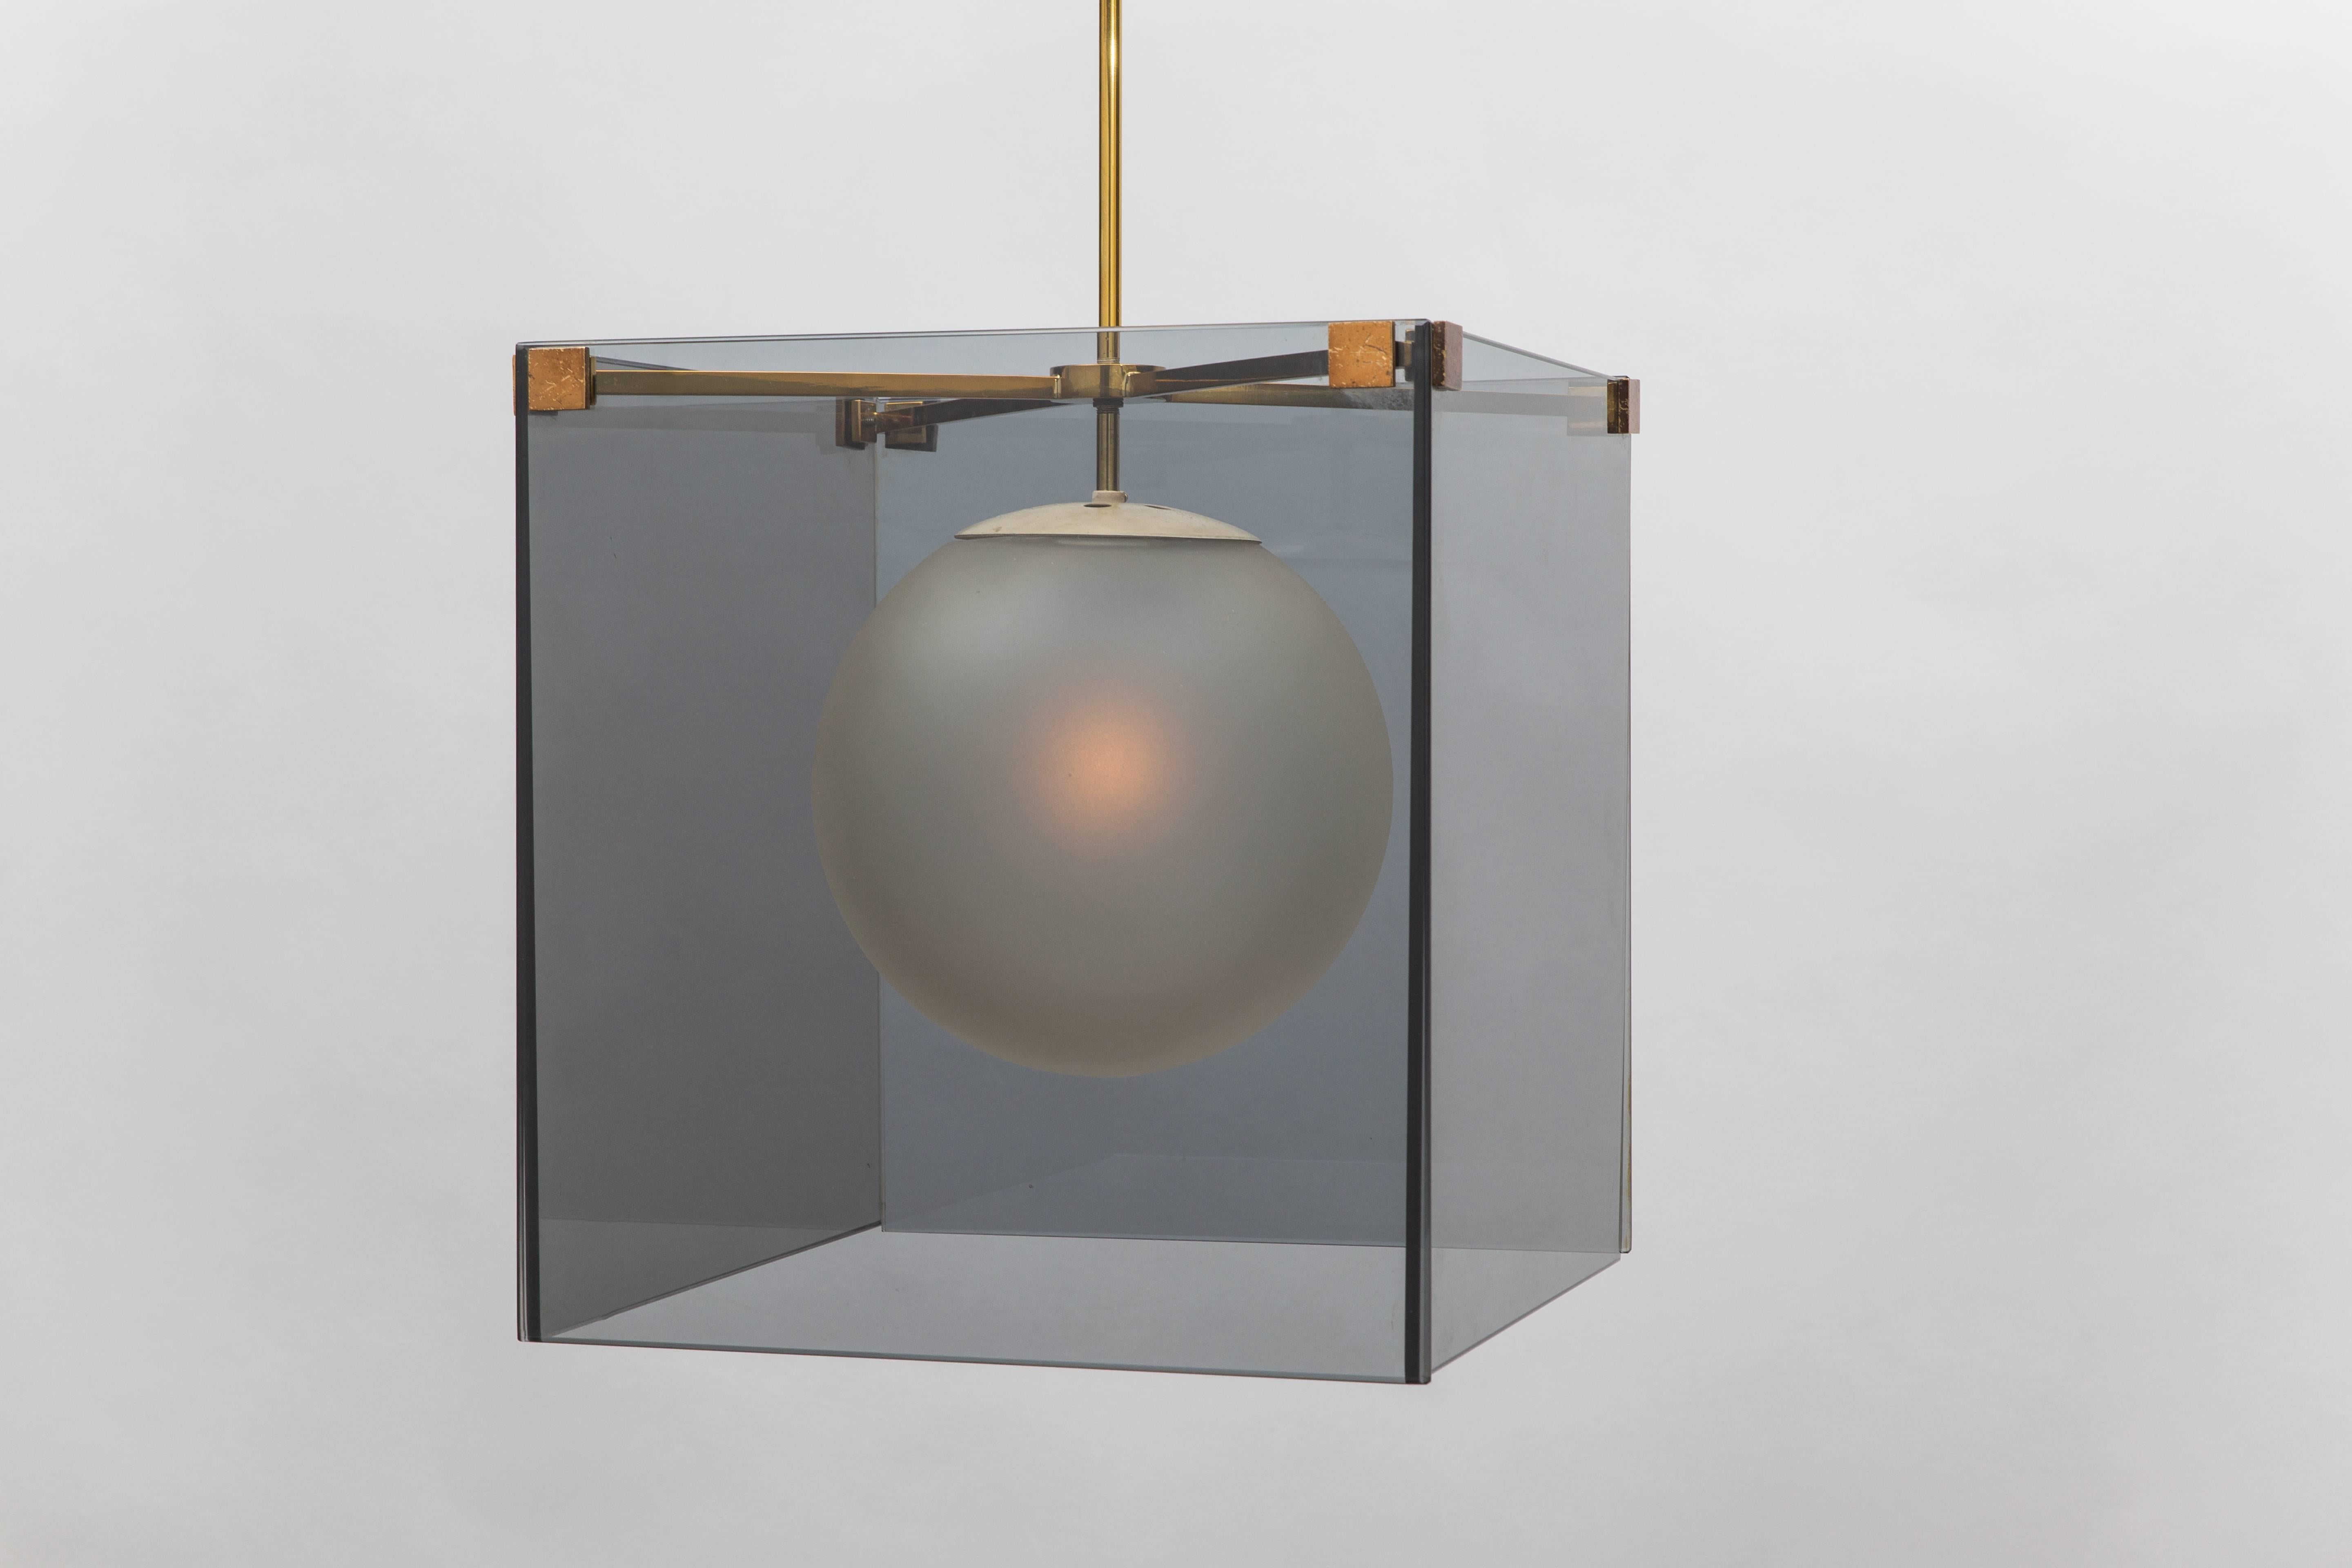 Max Ingrand for Fontana Arte rare chandelier composed of smoked glass plates suspended from gilt lacquer tubular brass frame, brass fittings and matching box canopy, and frosted glass globe hung on painted metal structure, Italy, circa 1965.  
This